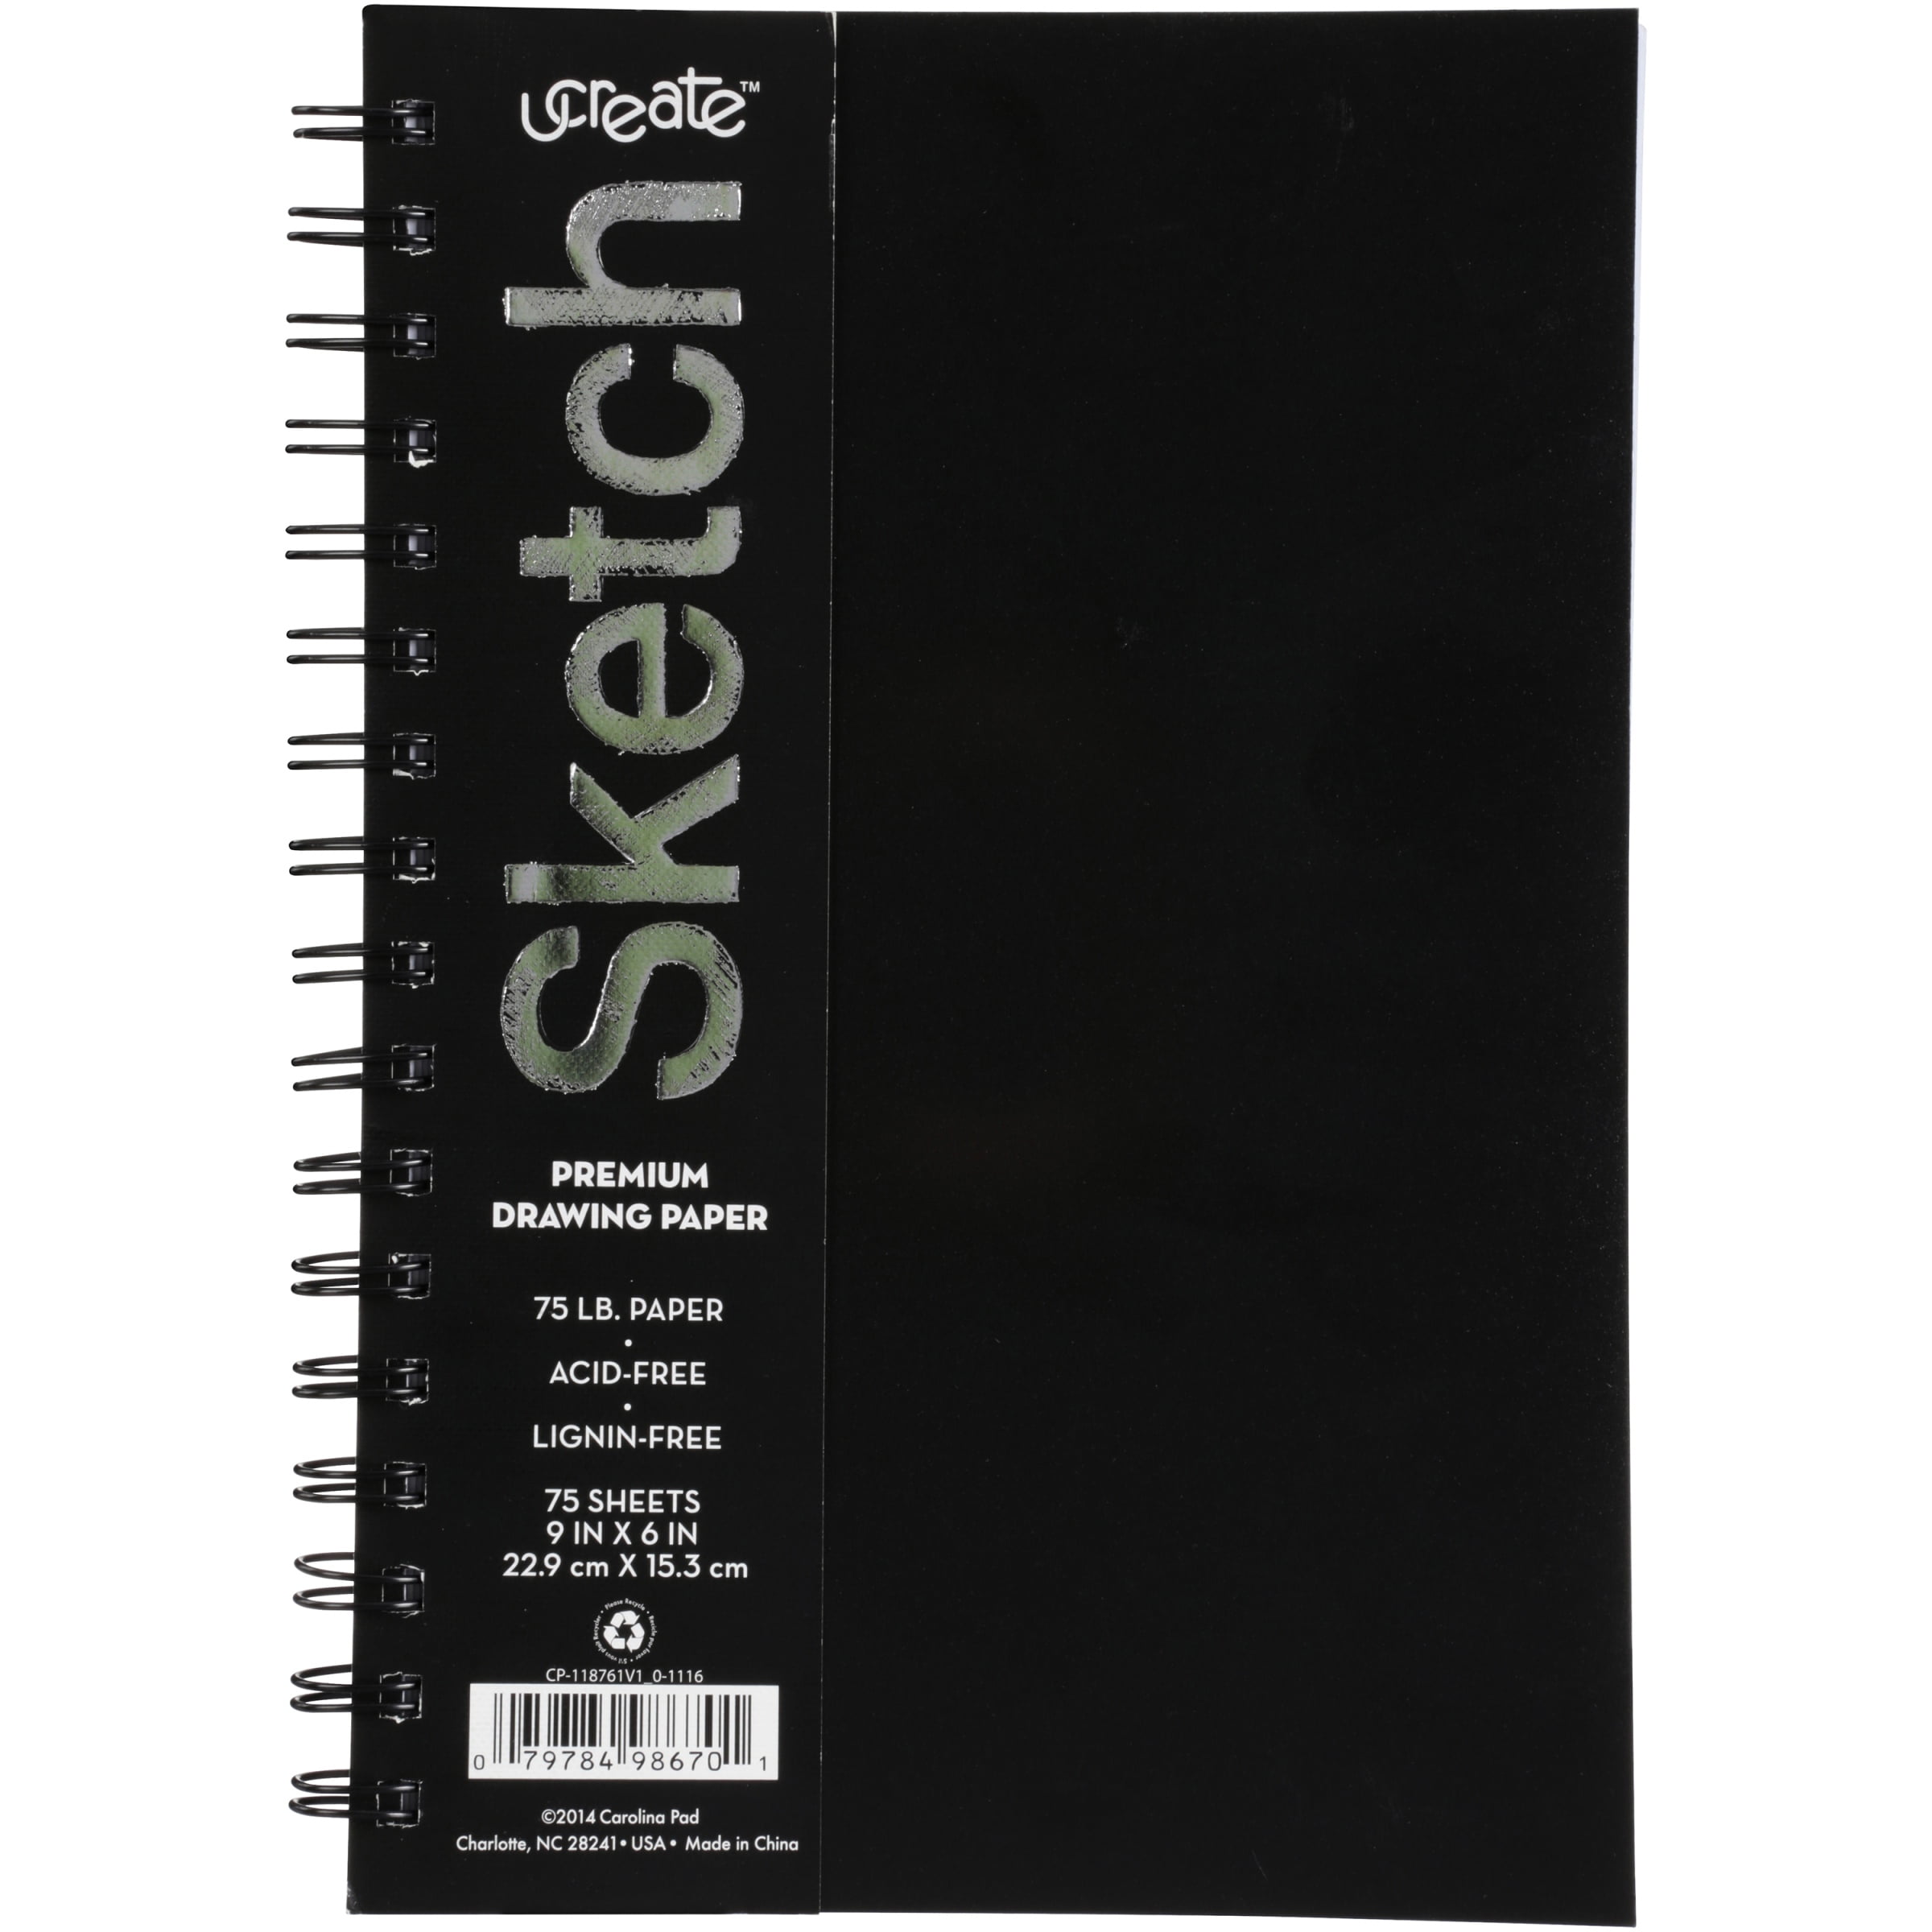 Generic Professional Sketch Paper 8k Drawing Paper Supply for Artist,Beginner,Student  (20pcs) - Professional Sketch Paper 8k Drawing Paper Supply for Artist,Beginner,Student  (20pcs) . shop for Generic products in India.